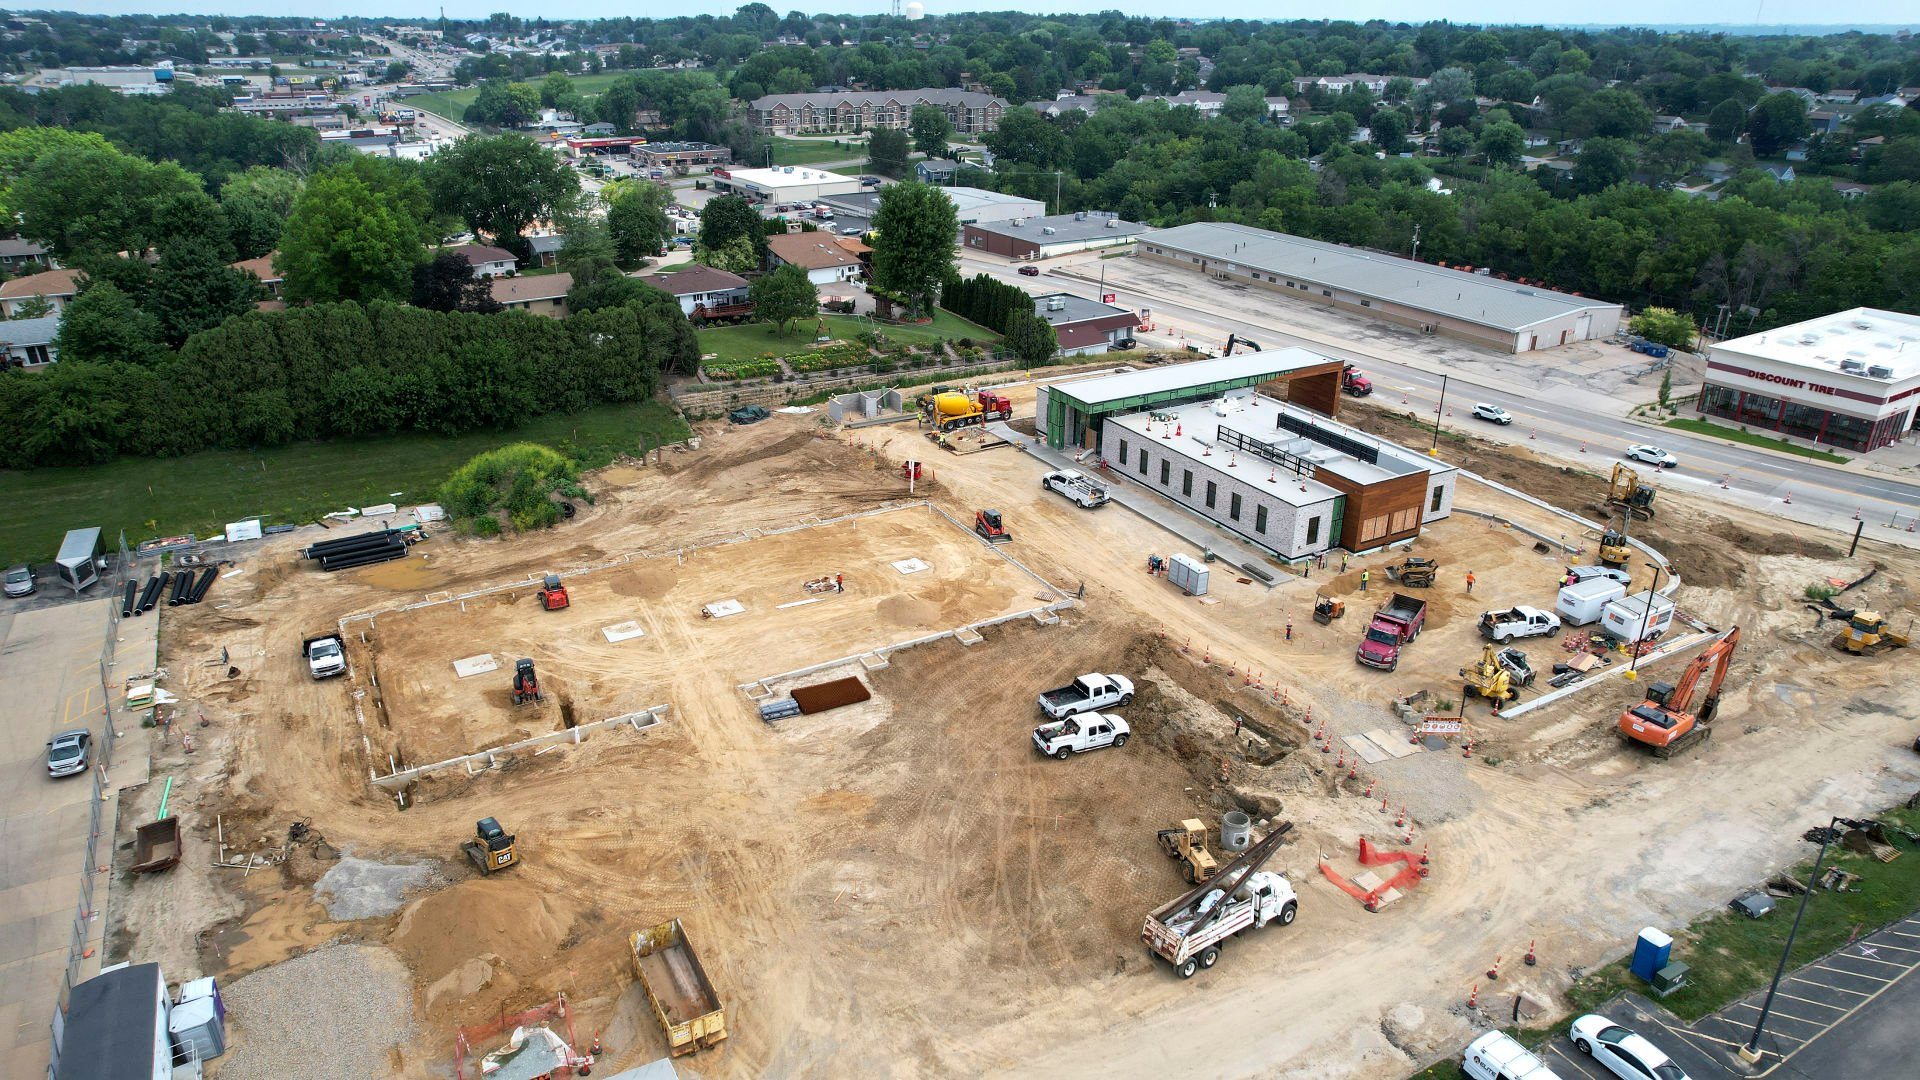 Work continues on constructing an 11,400-square-foot retail building (left) on Stoneman Road, near the new Green State Credit Union on Wednesday, July 20, 2022.    PHOTO CREDIT: Dave Kettering